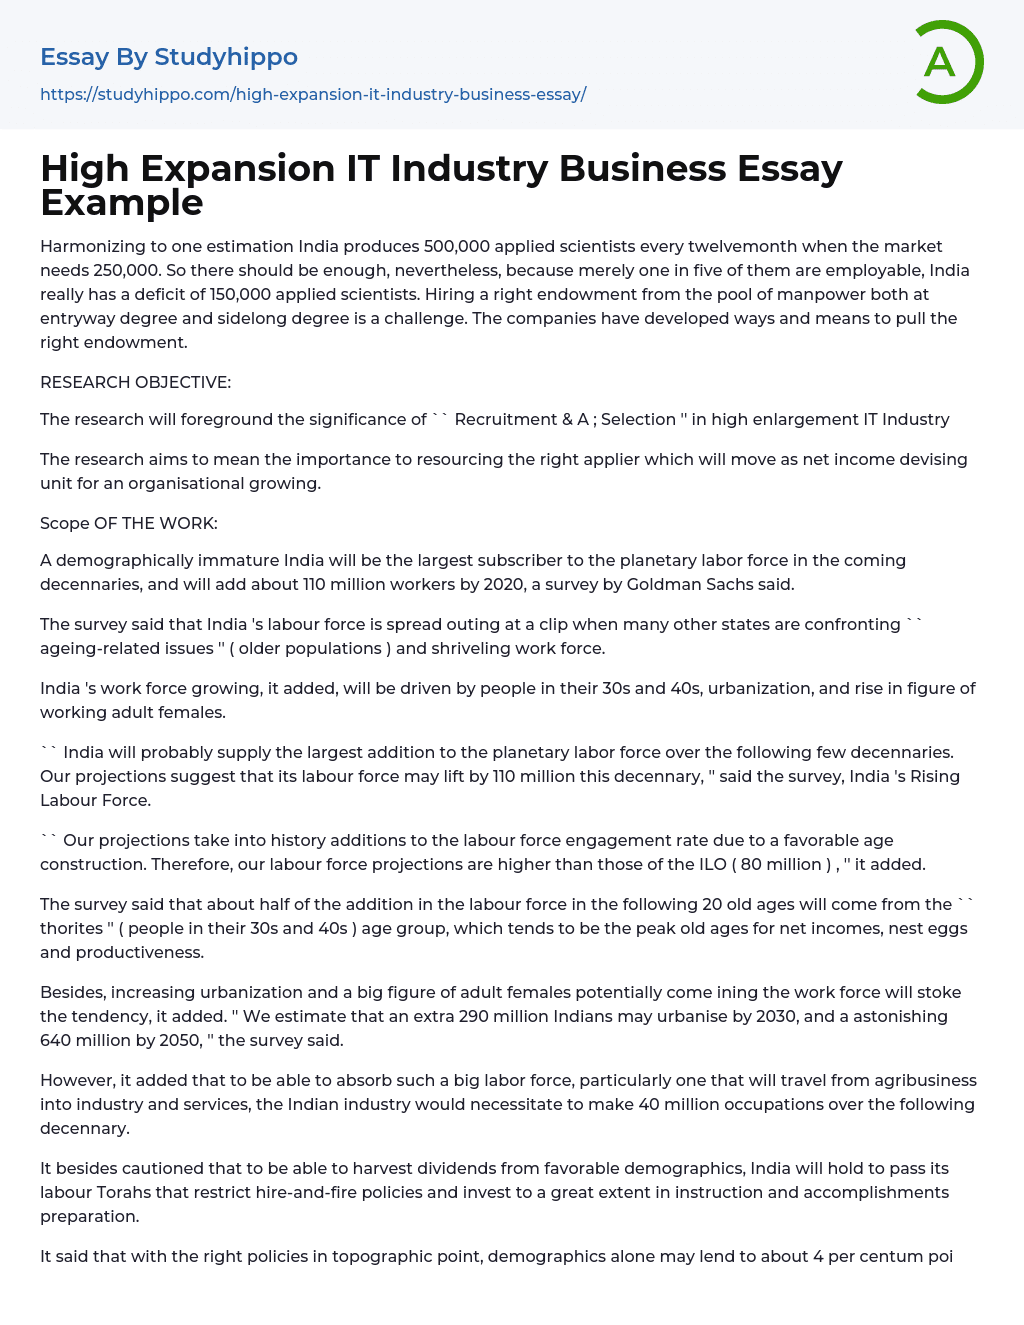 High Expansion IT Industry Business Essay Example